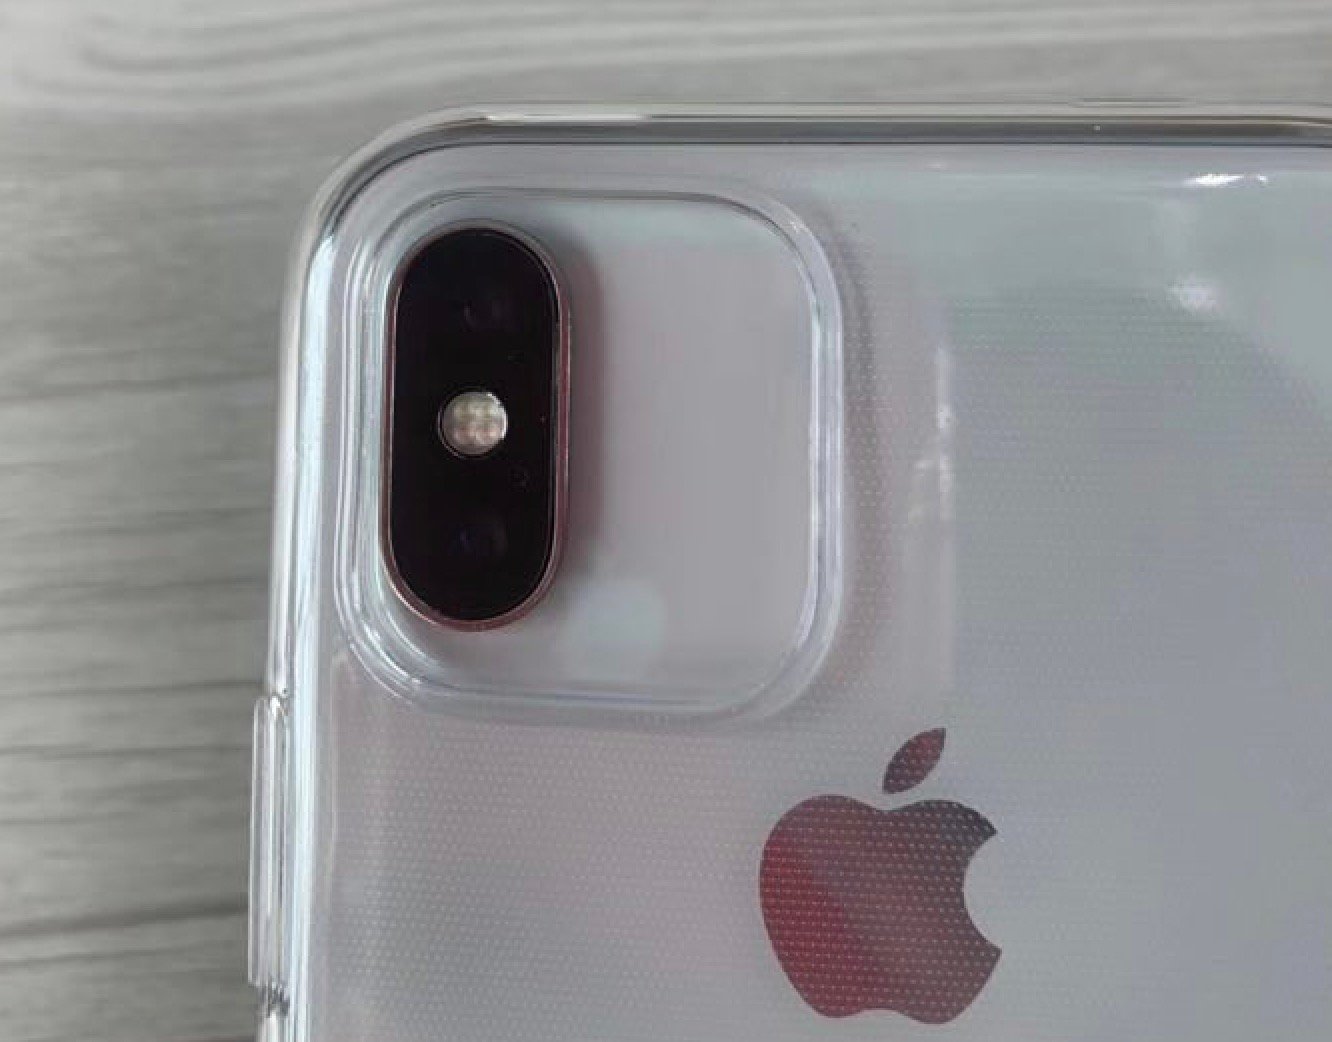 coque iphone xr 11